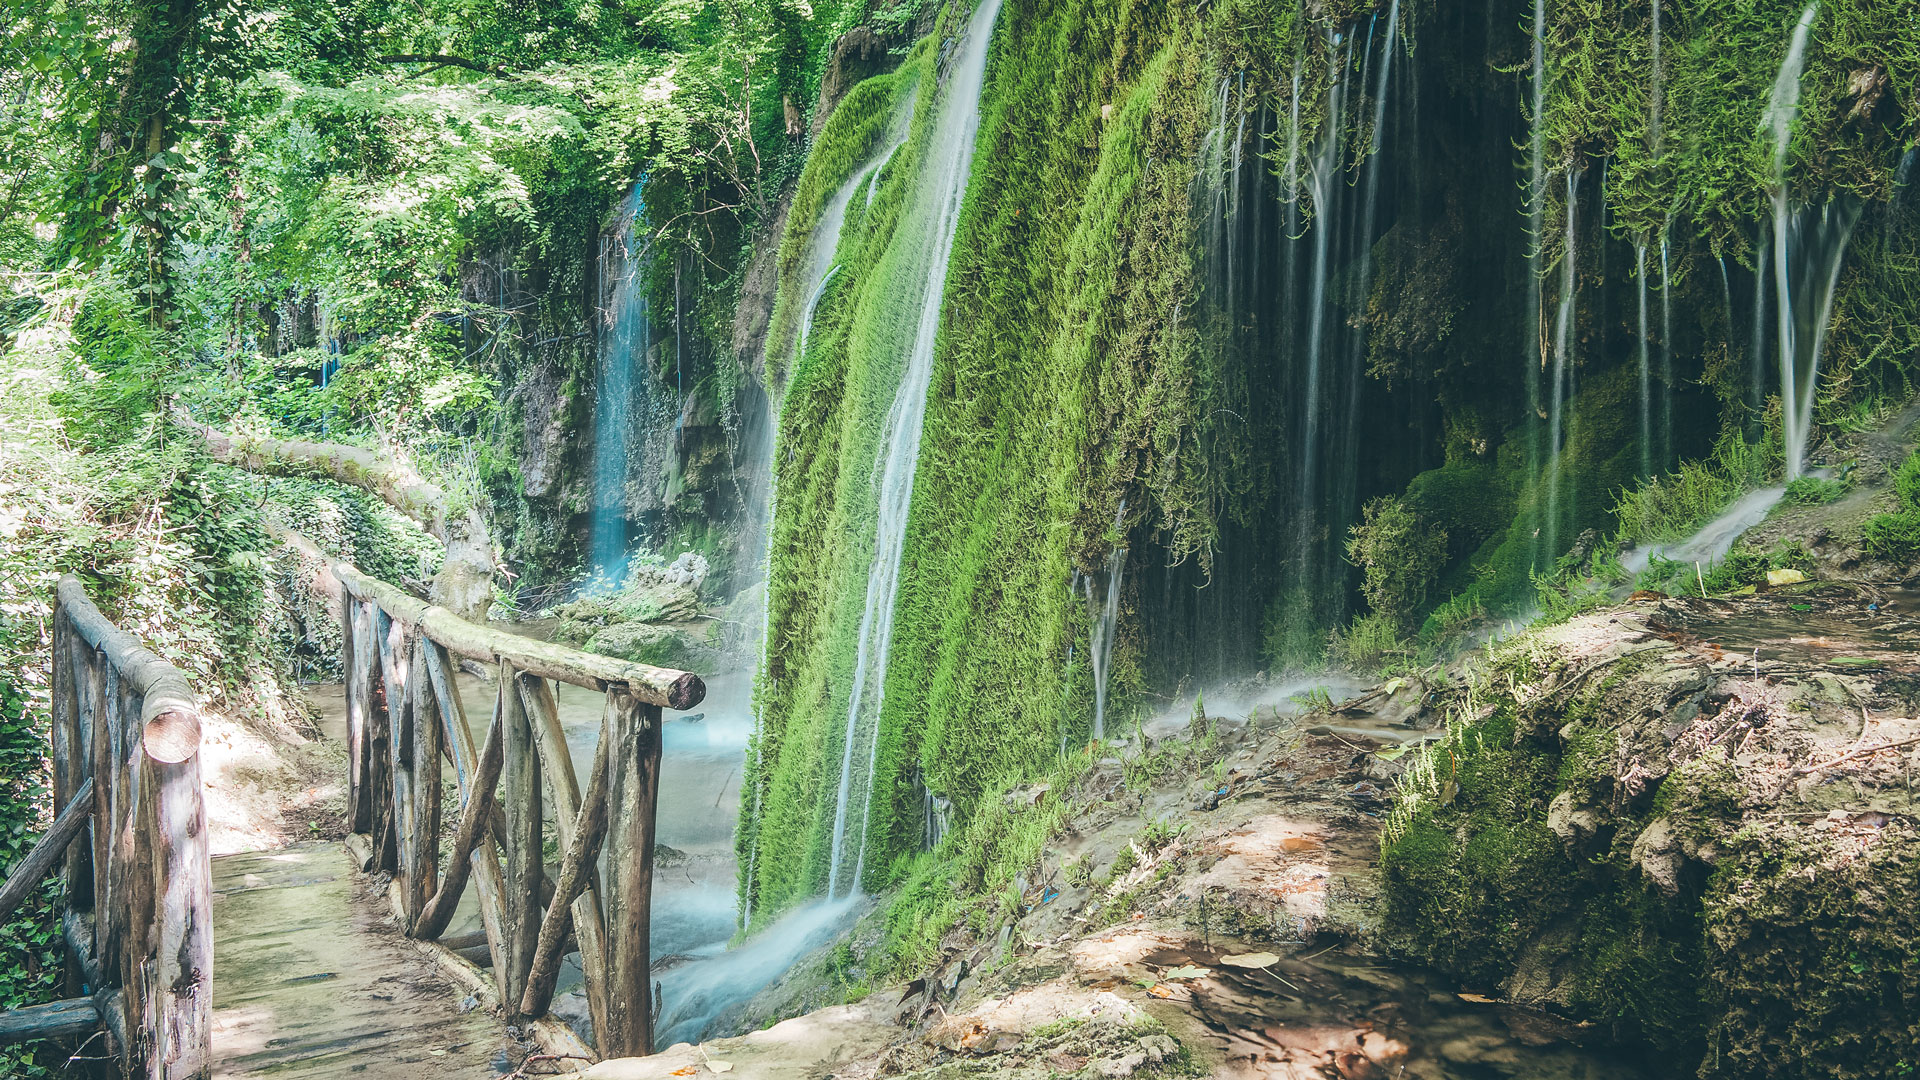 Skra Waterfalls, nature’s revitalizing power in all its glory